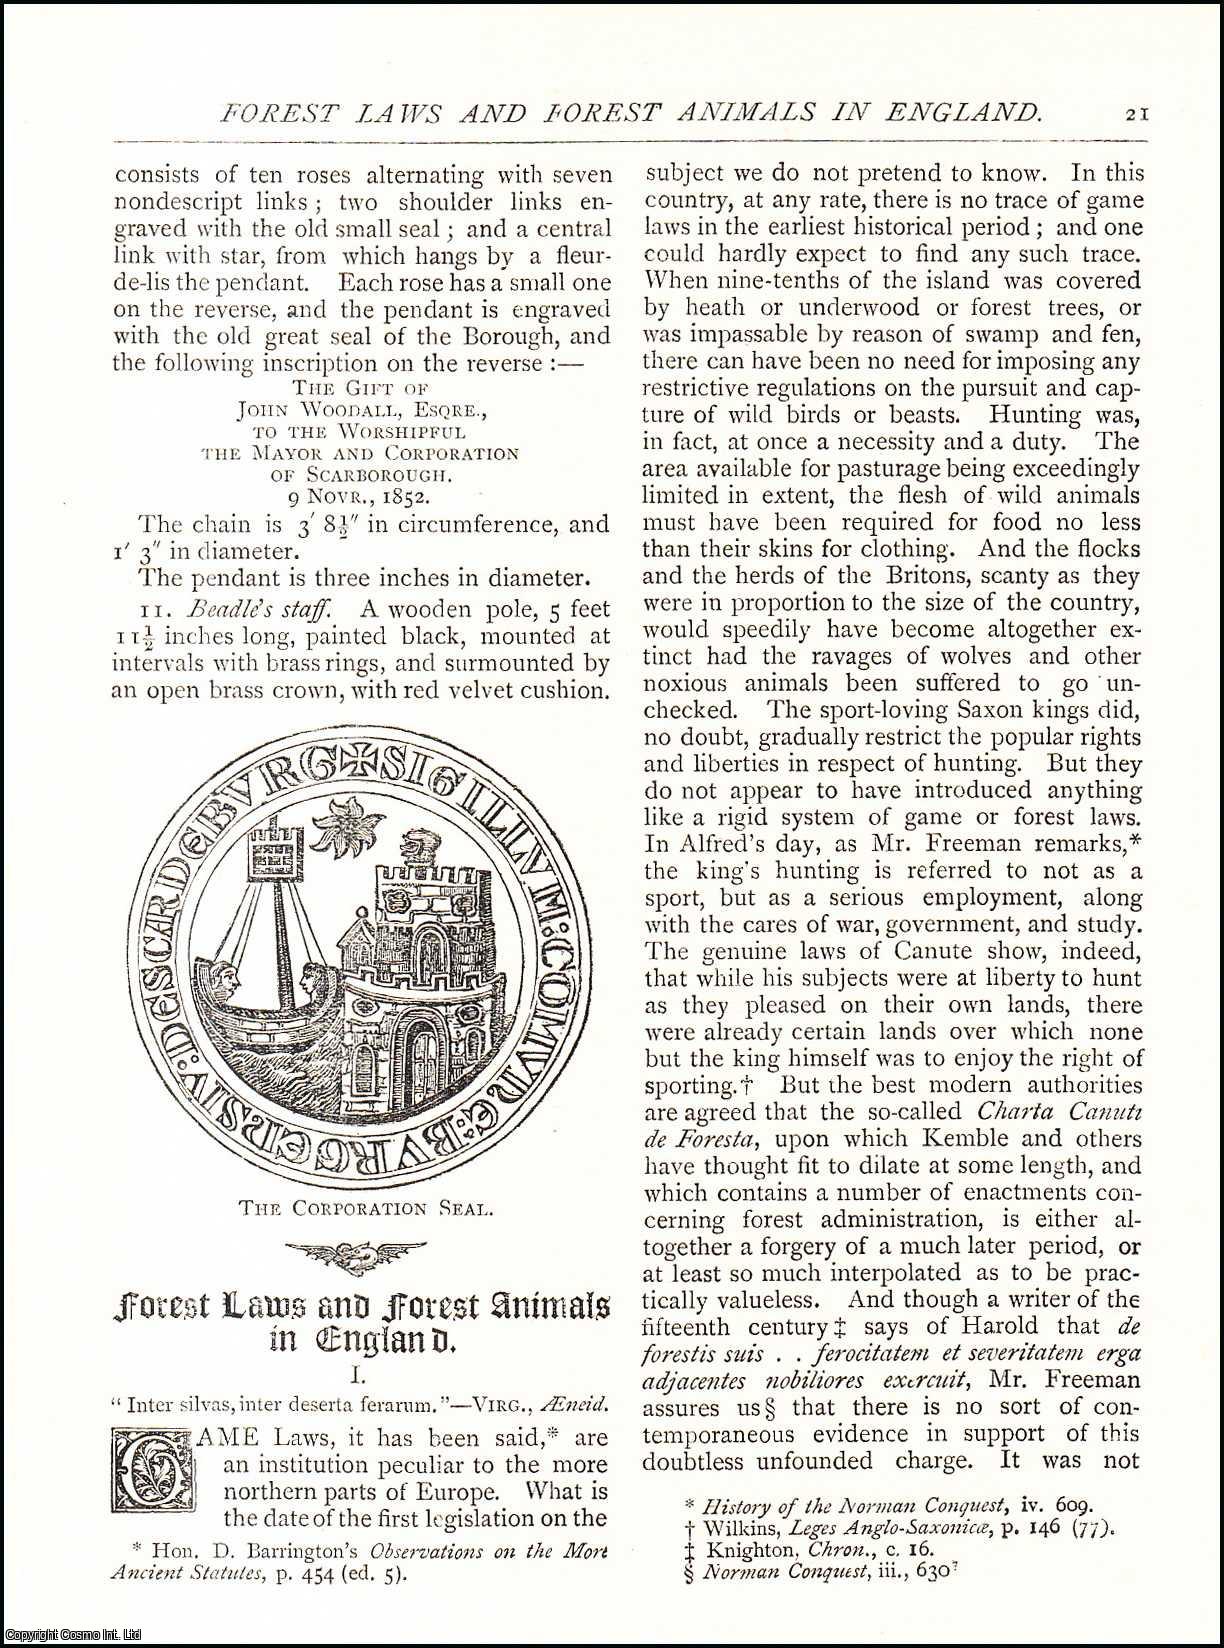 F. - Forest Laws and Forest Animals in England Part I, II and III. A complete original article from The Antiquary Magazine, 1883.